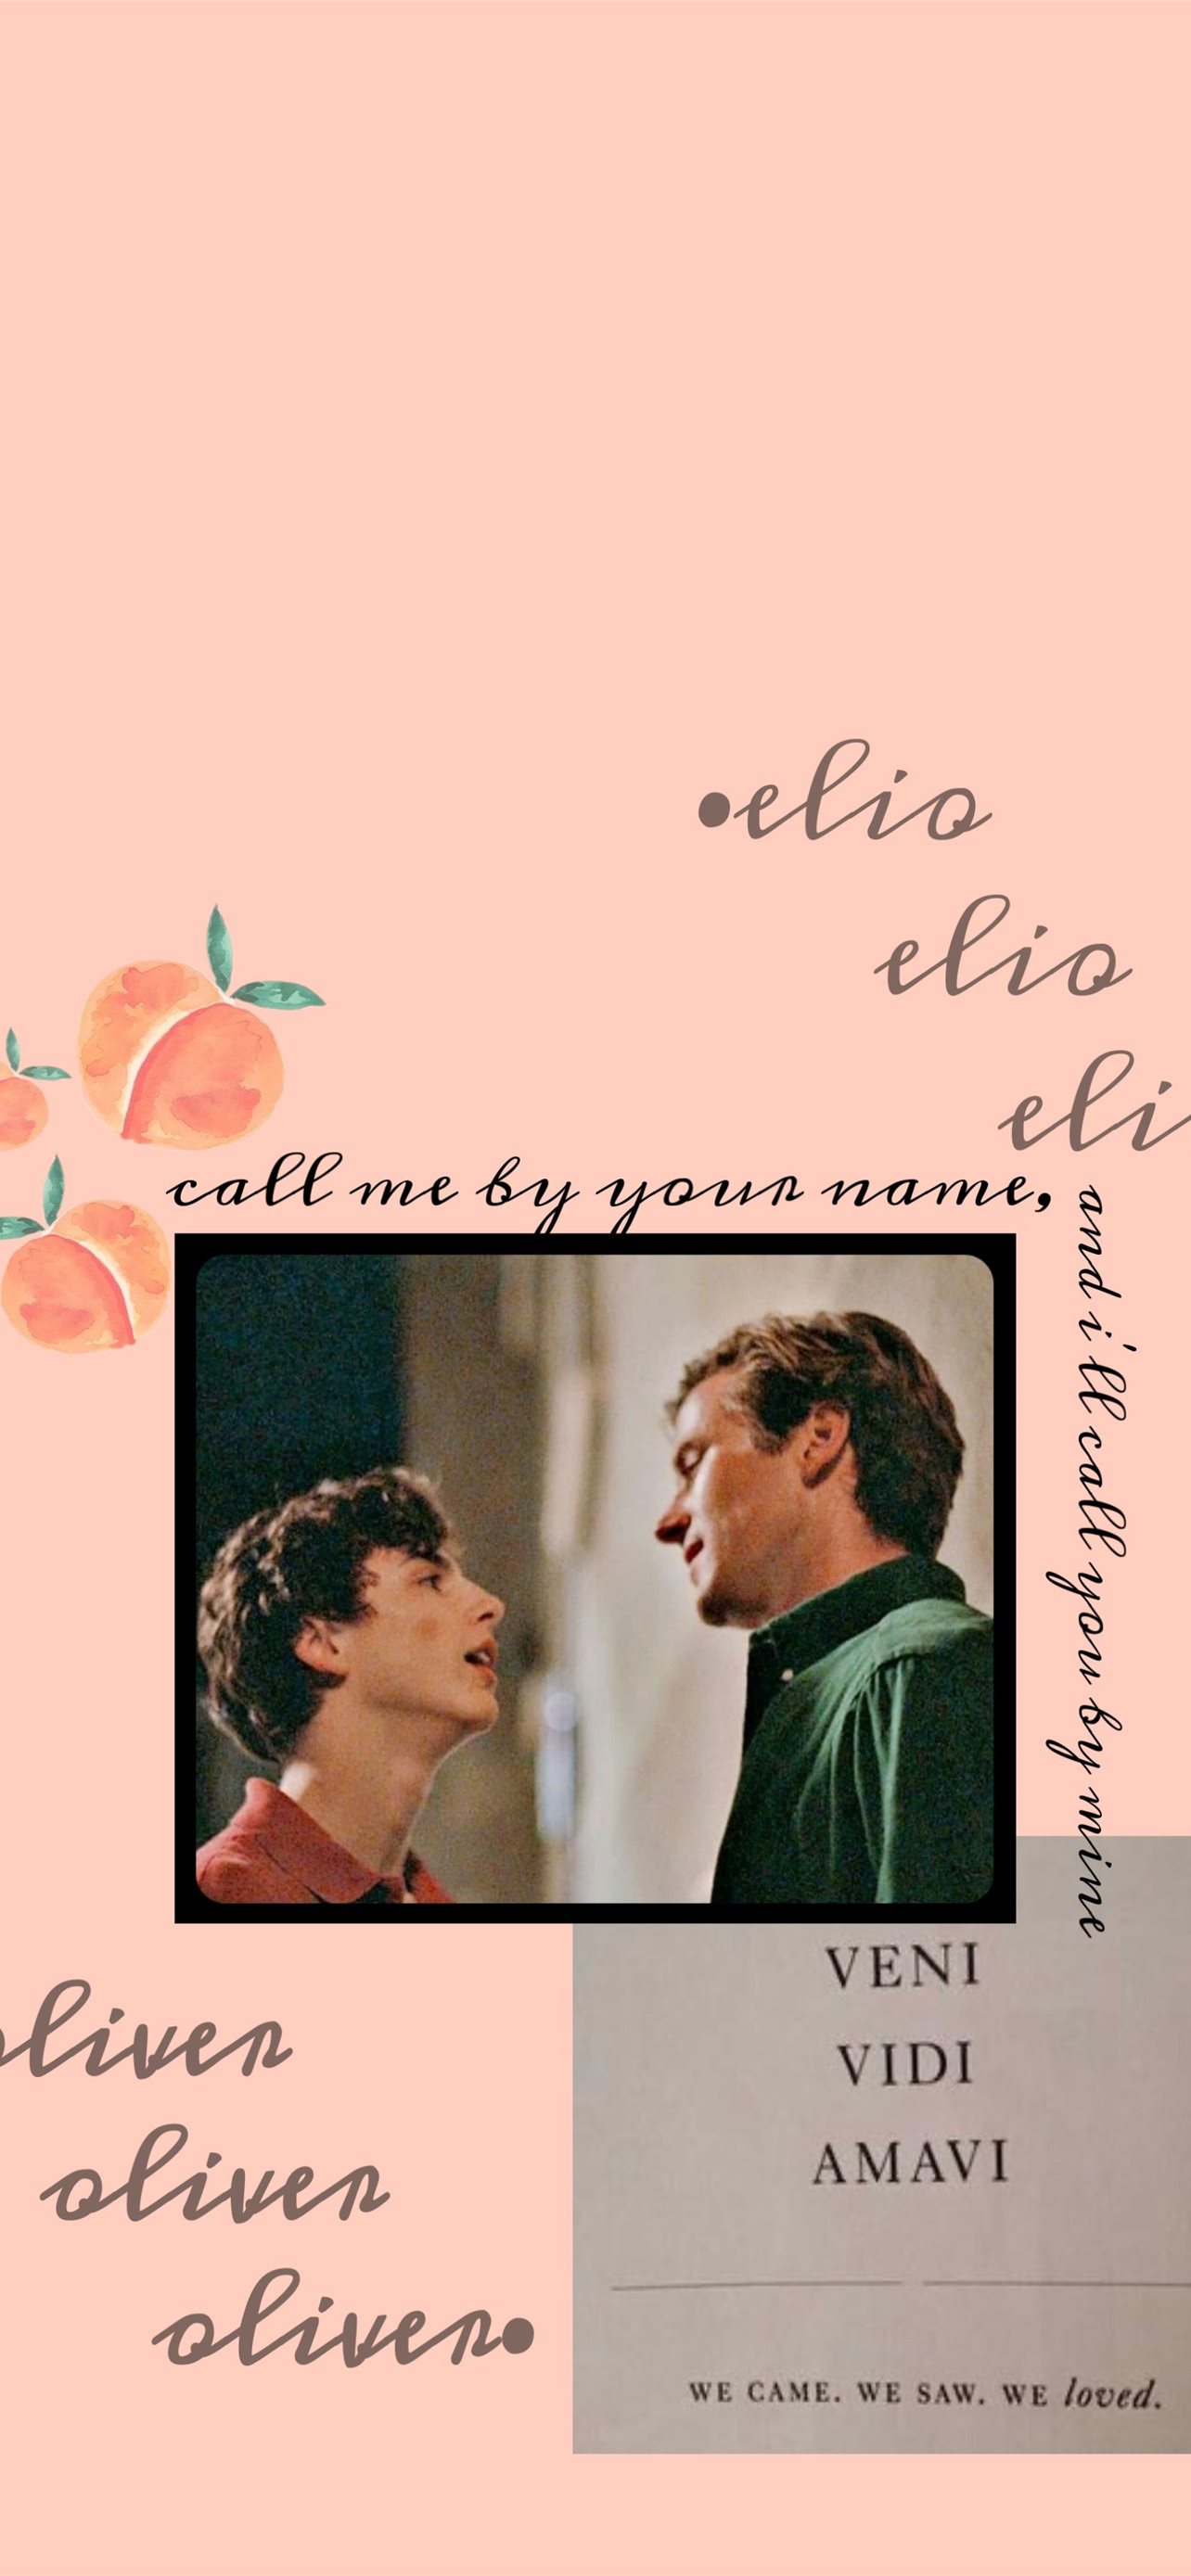 call me by your name iPhone Wallpapers Free Download